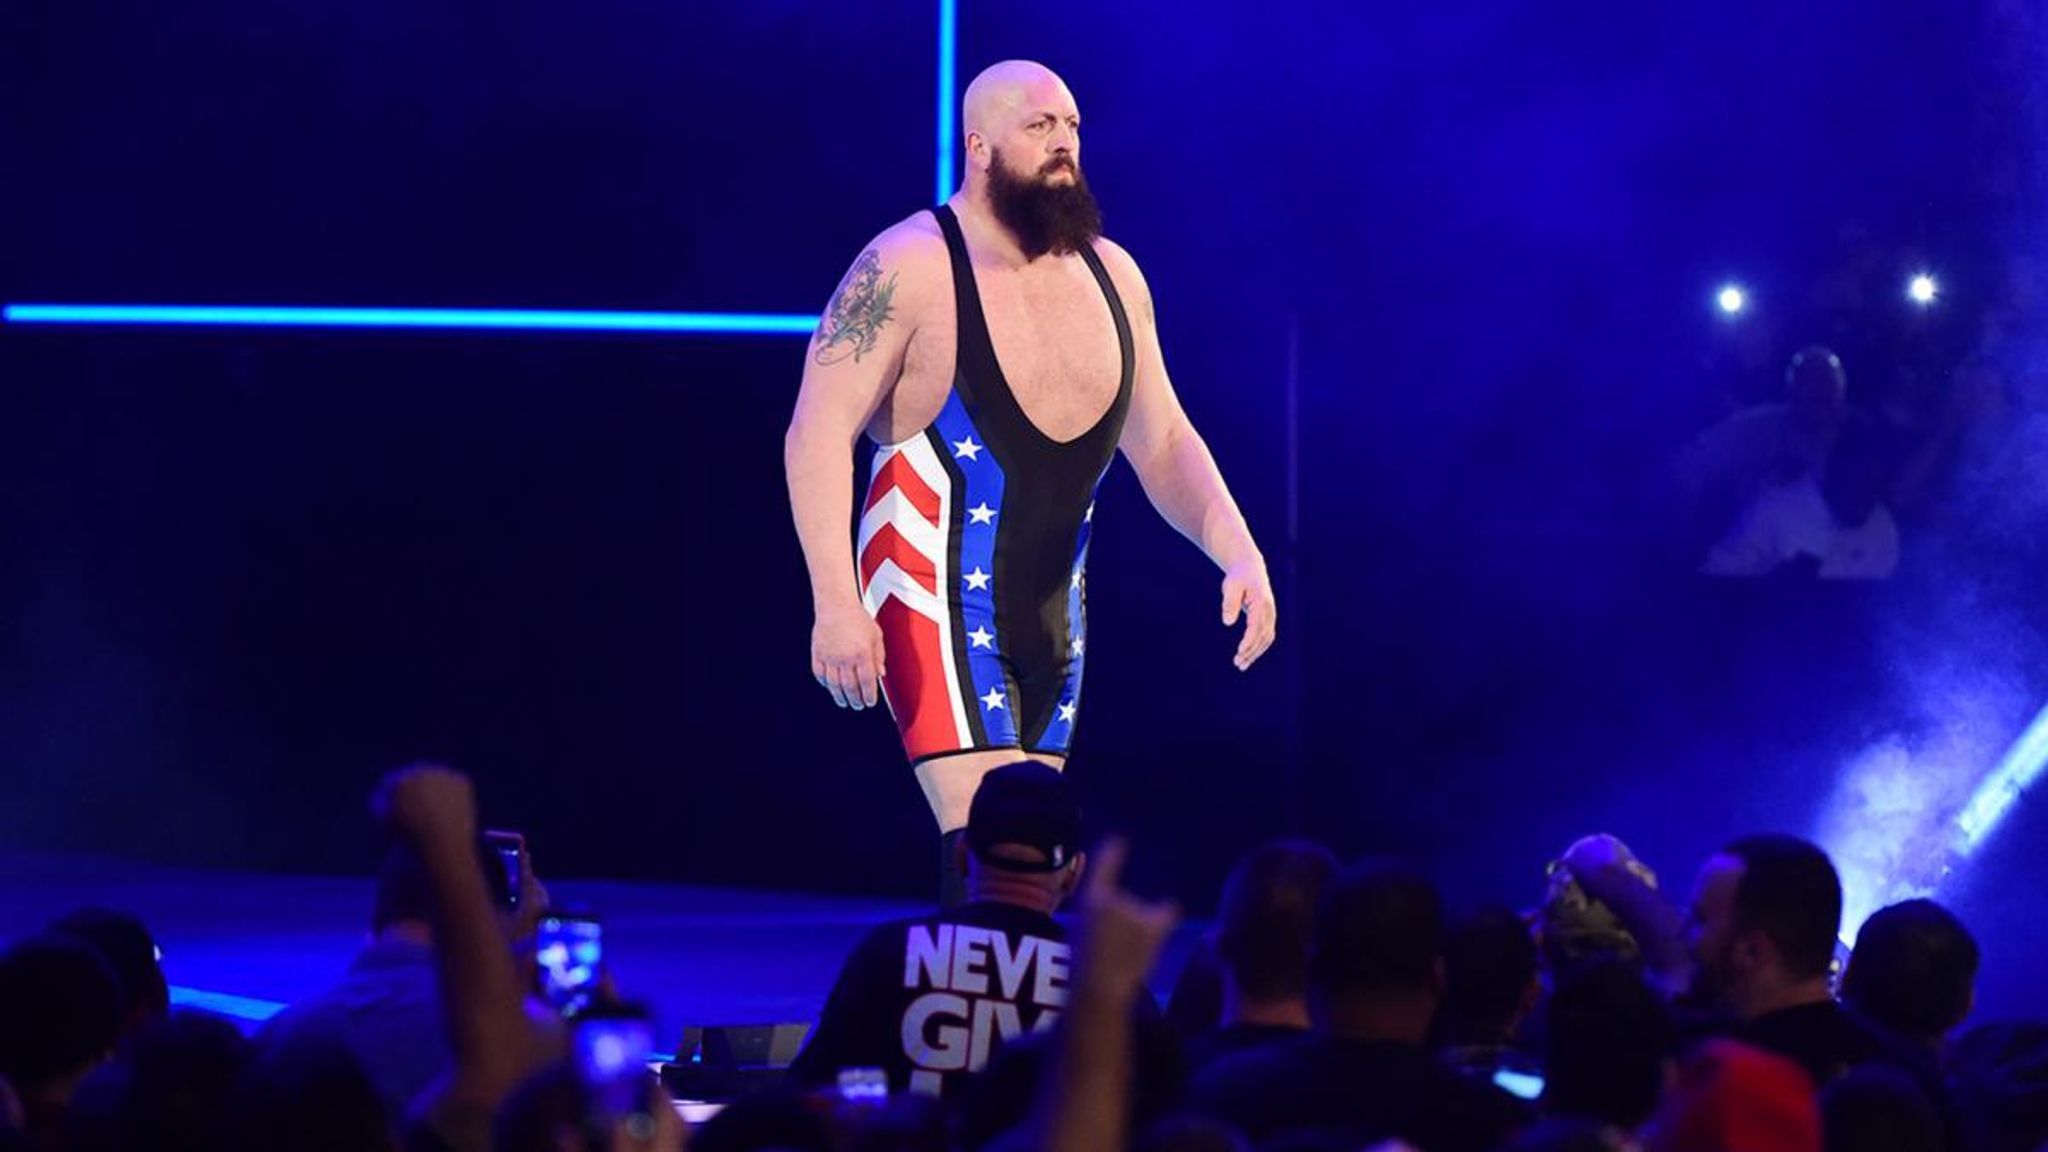 Paul Wight shares exciting news about his comeback to the wrestling ring, while Zack Sabre Jr. discusses his experiences wrestling Bryan Danielson.